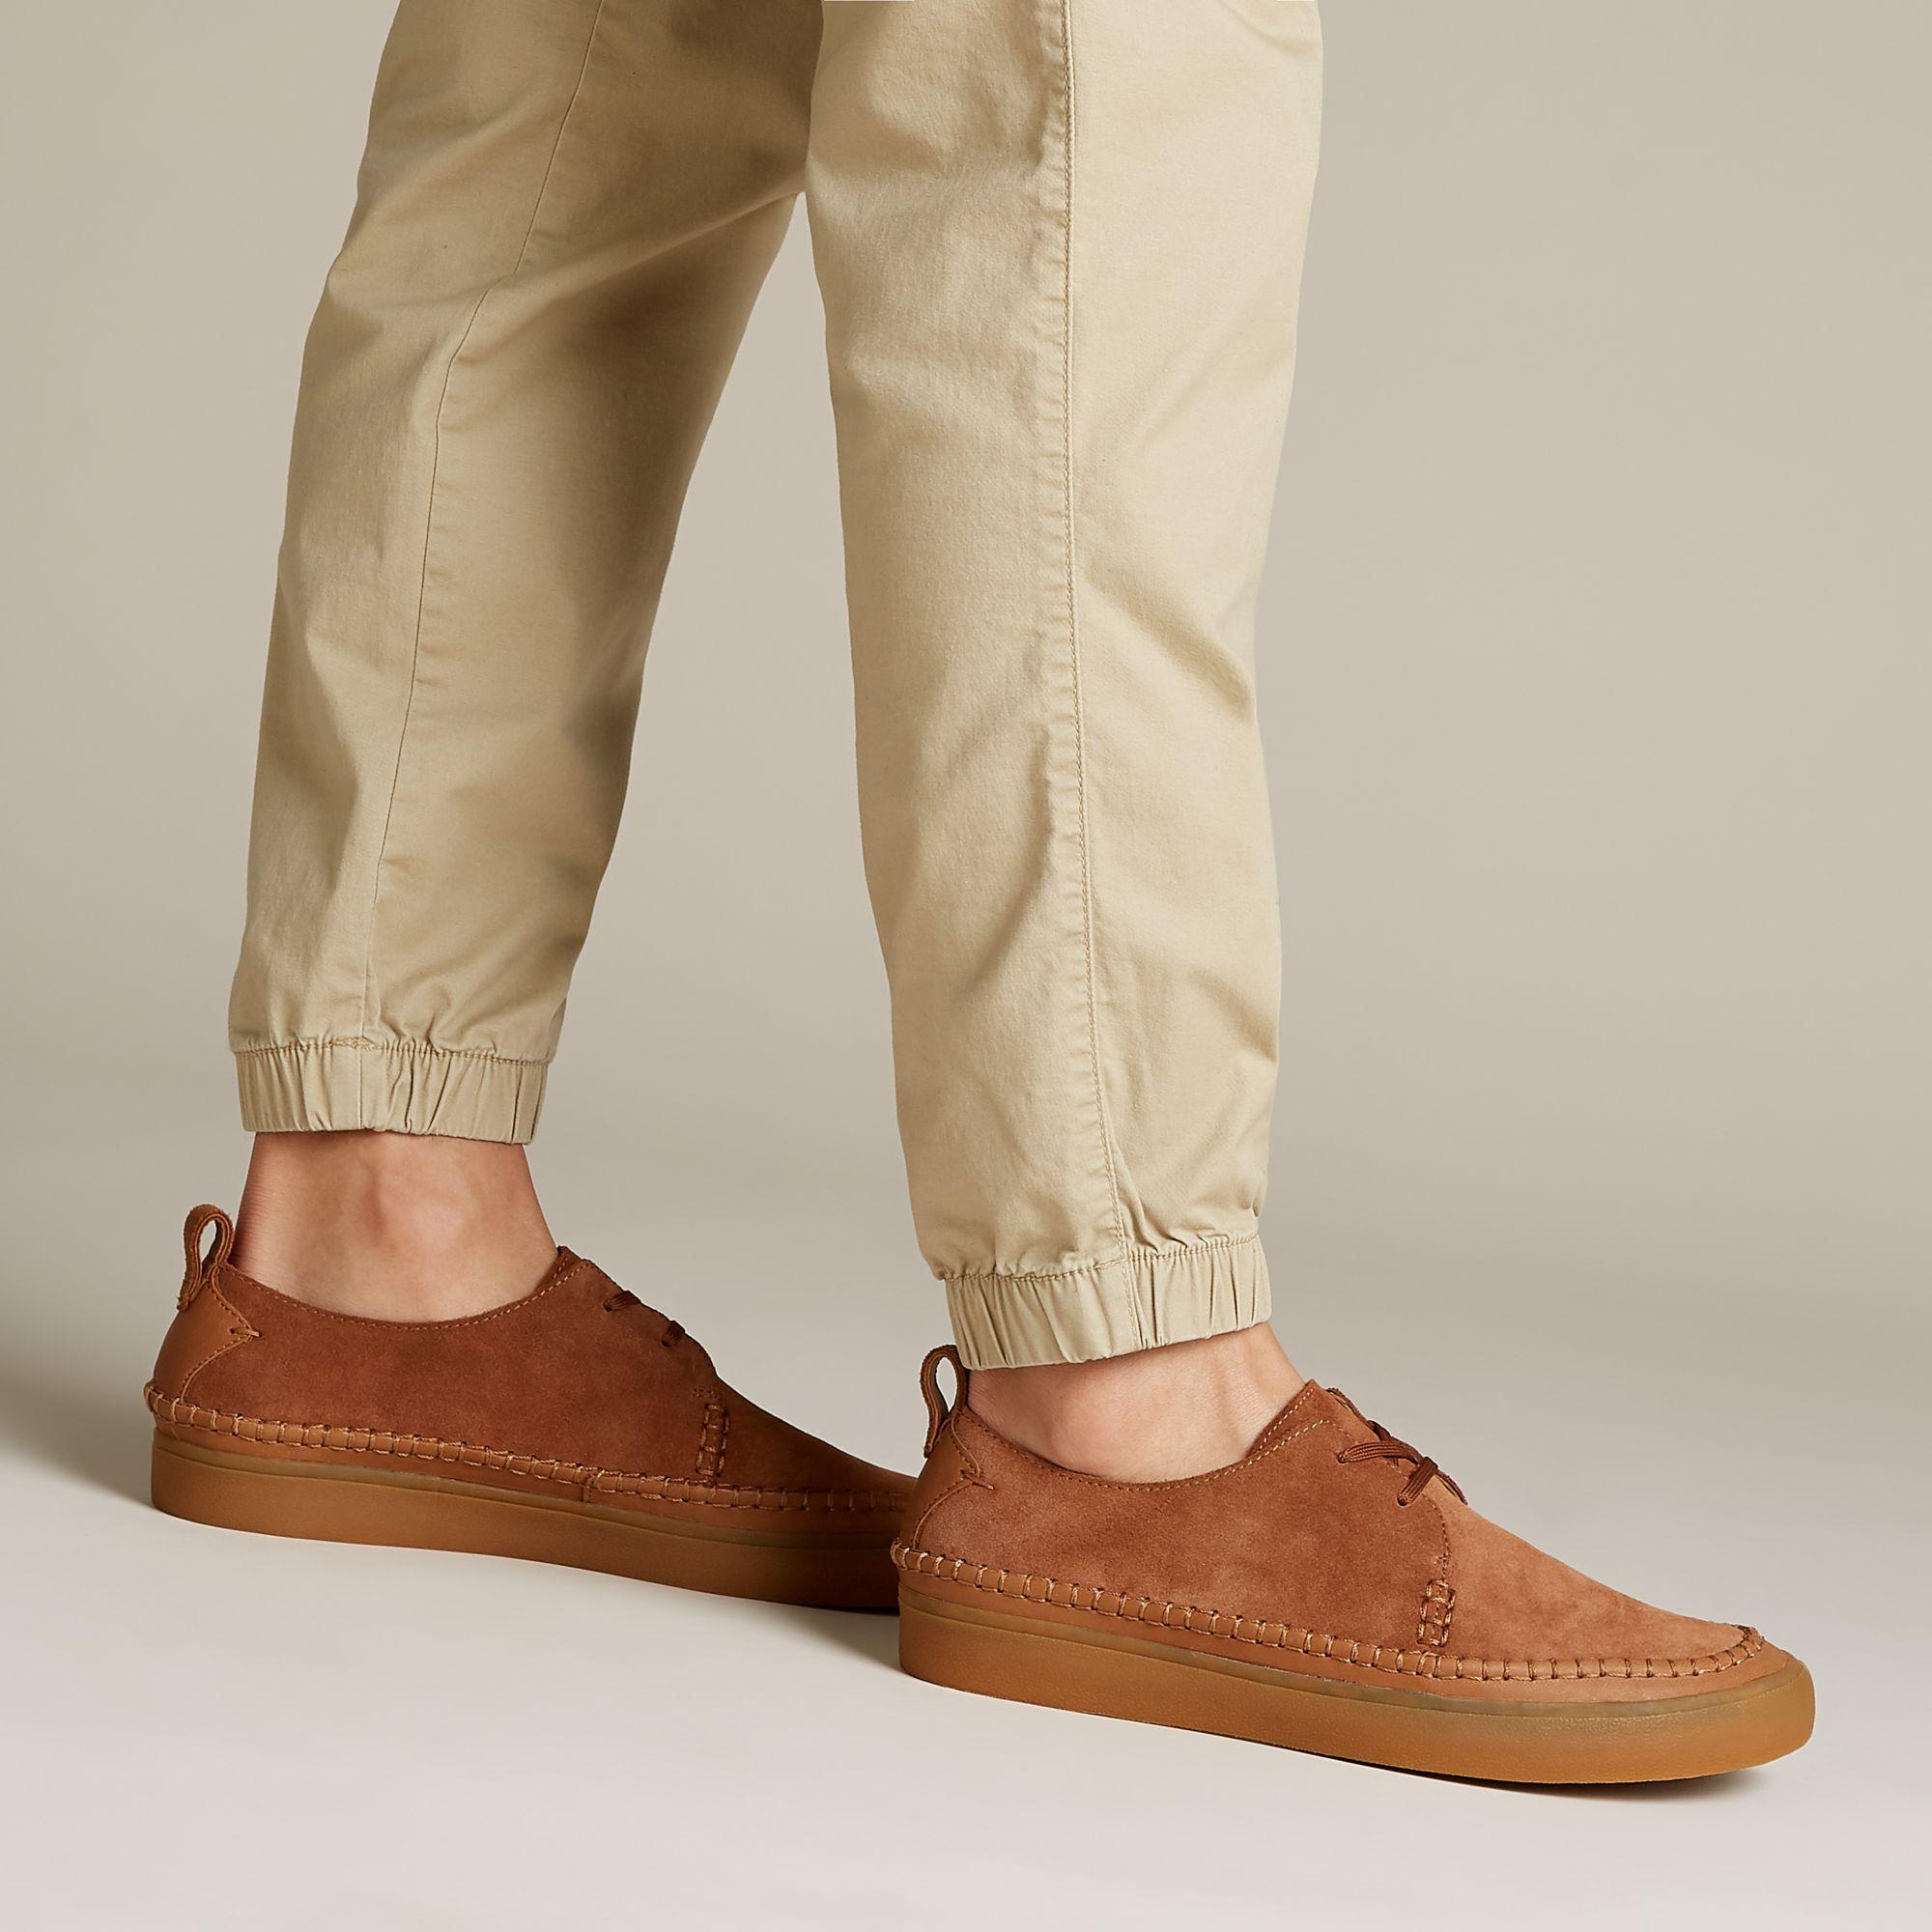 Clarks Kessell Craft Tan Suede Clearance, SAVE 49% - abaroadrive.com